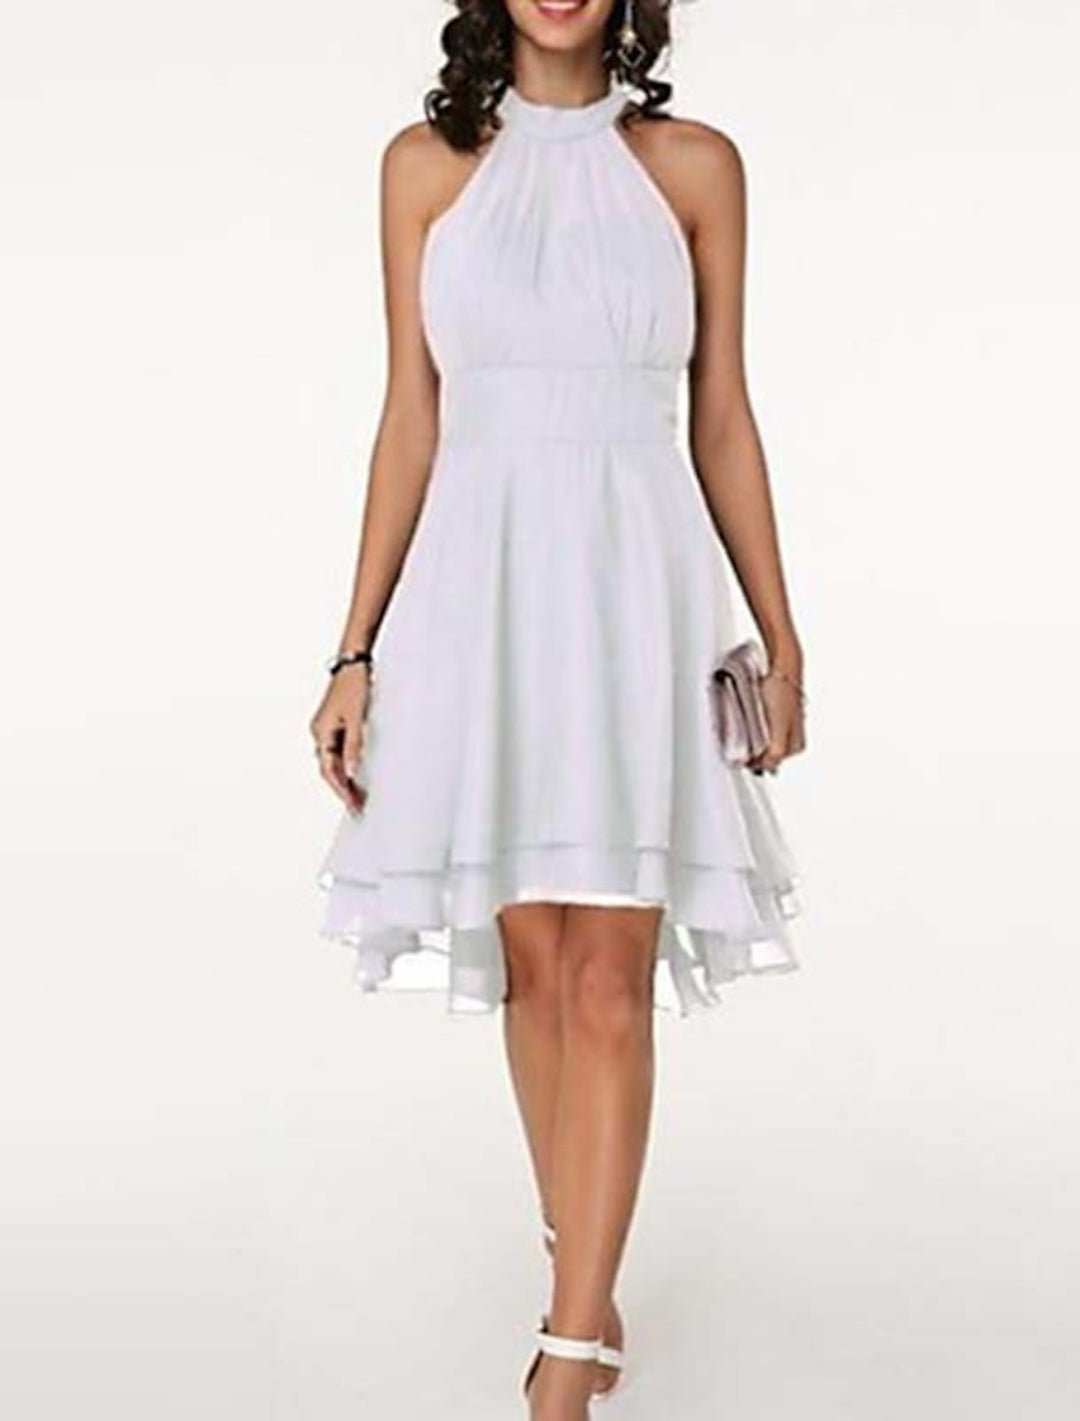 A-Line/Princess Halter Knee-Length Sleeveless Cocktail Party Dresses Chiffon with Ruffles